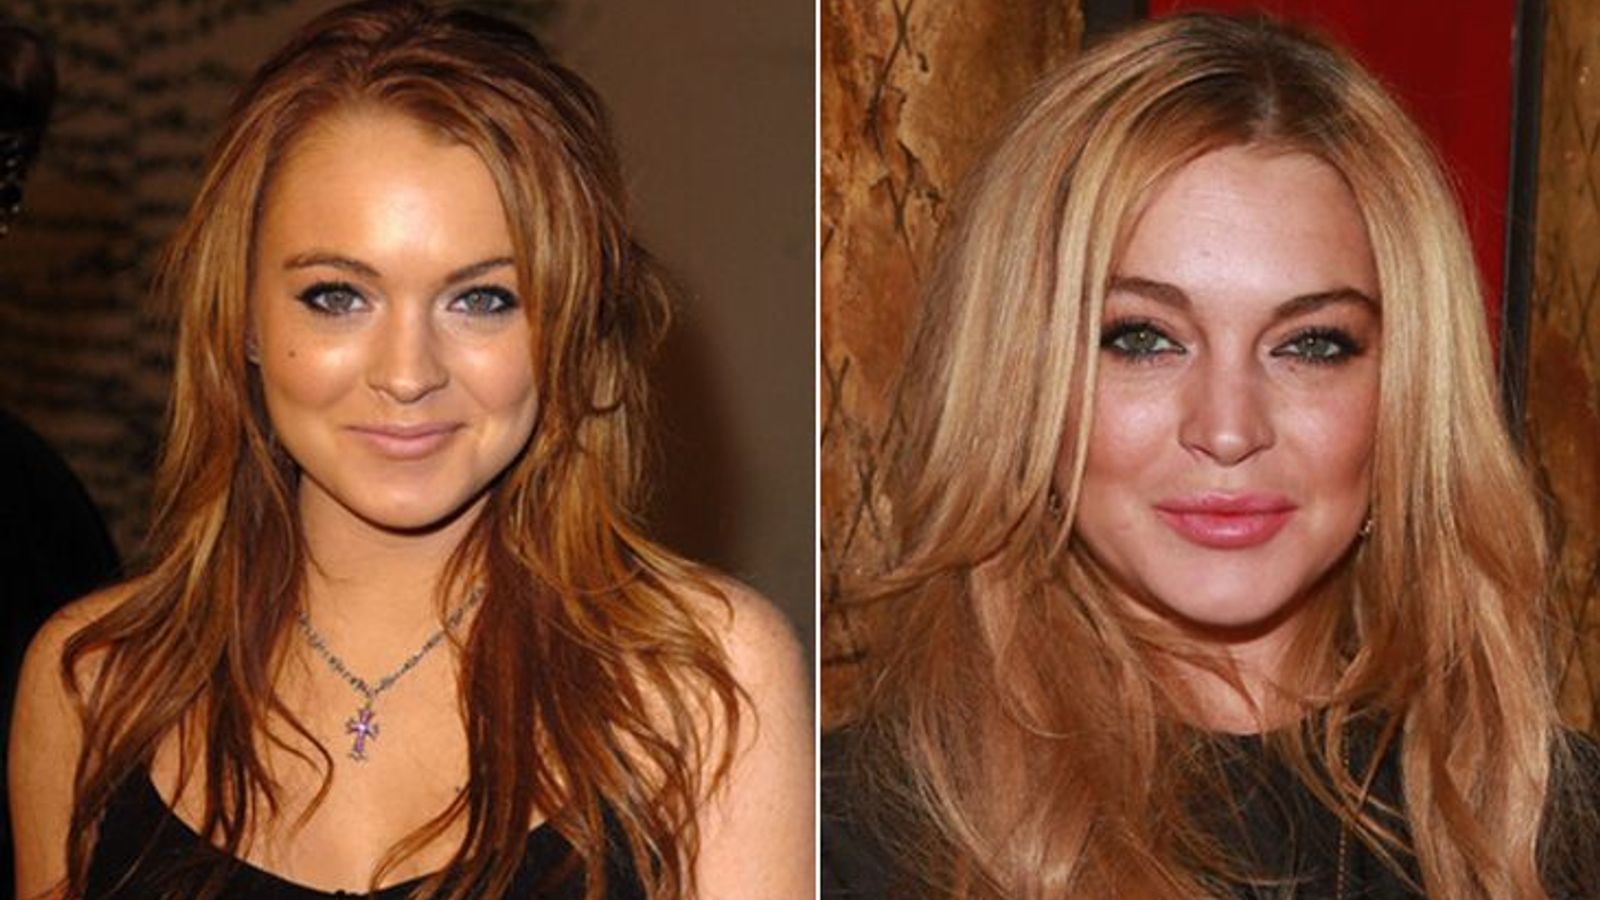 Lindsay Lohan before and after plastic surgery.